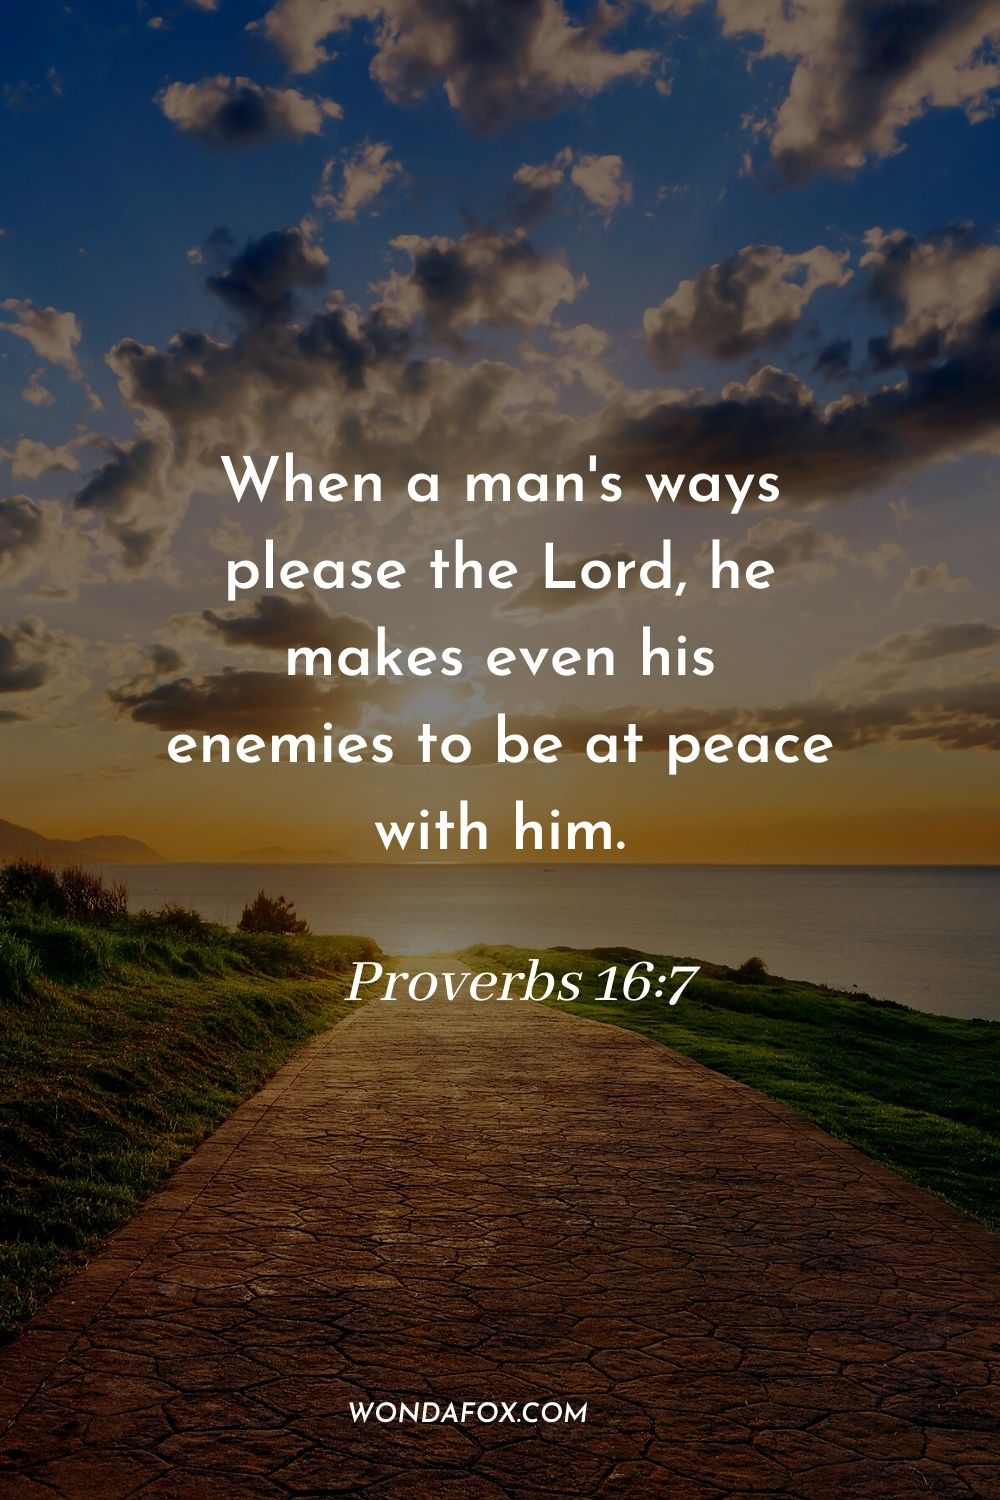 When a man's ways please the Lord, he makes even his enemies to be at peace with him. Proverbs 16:7